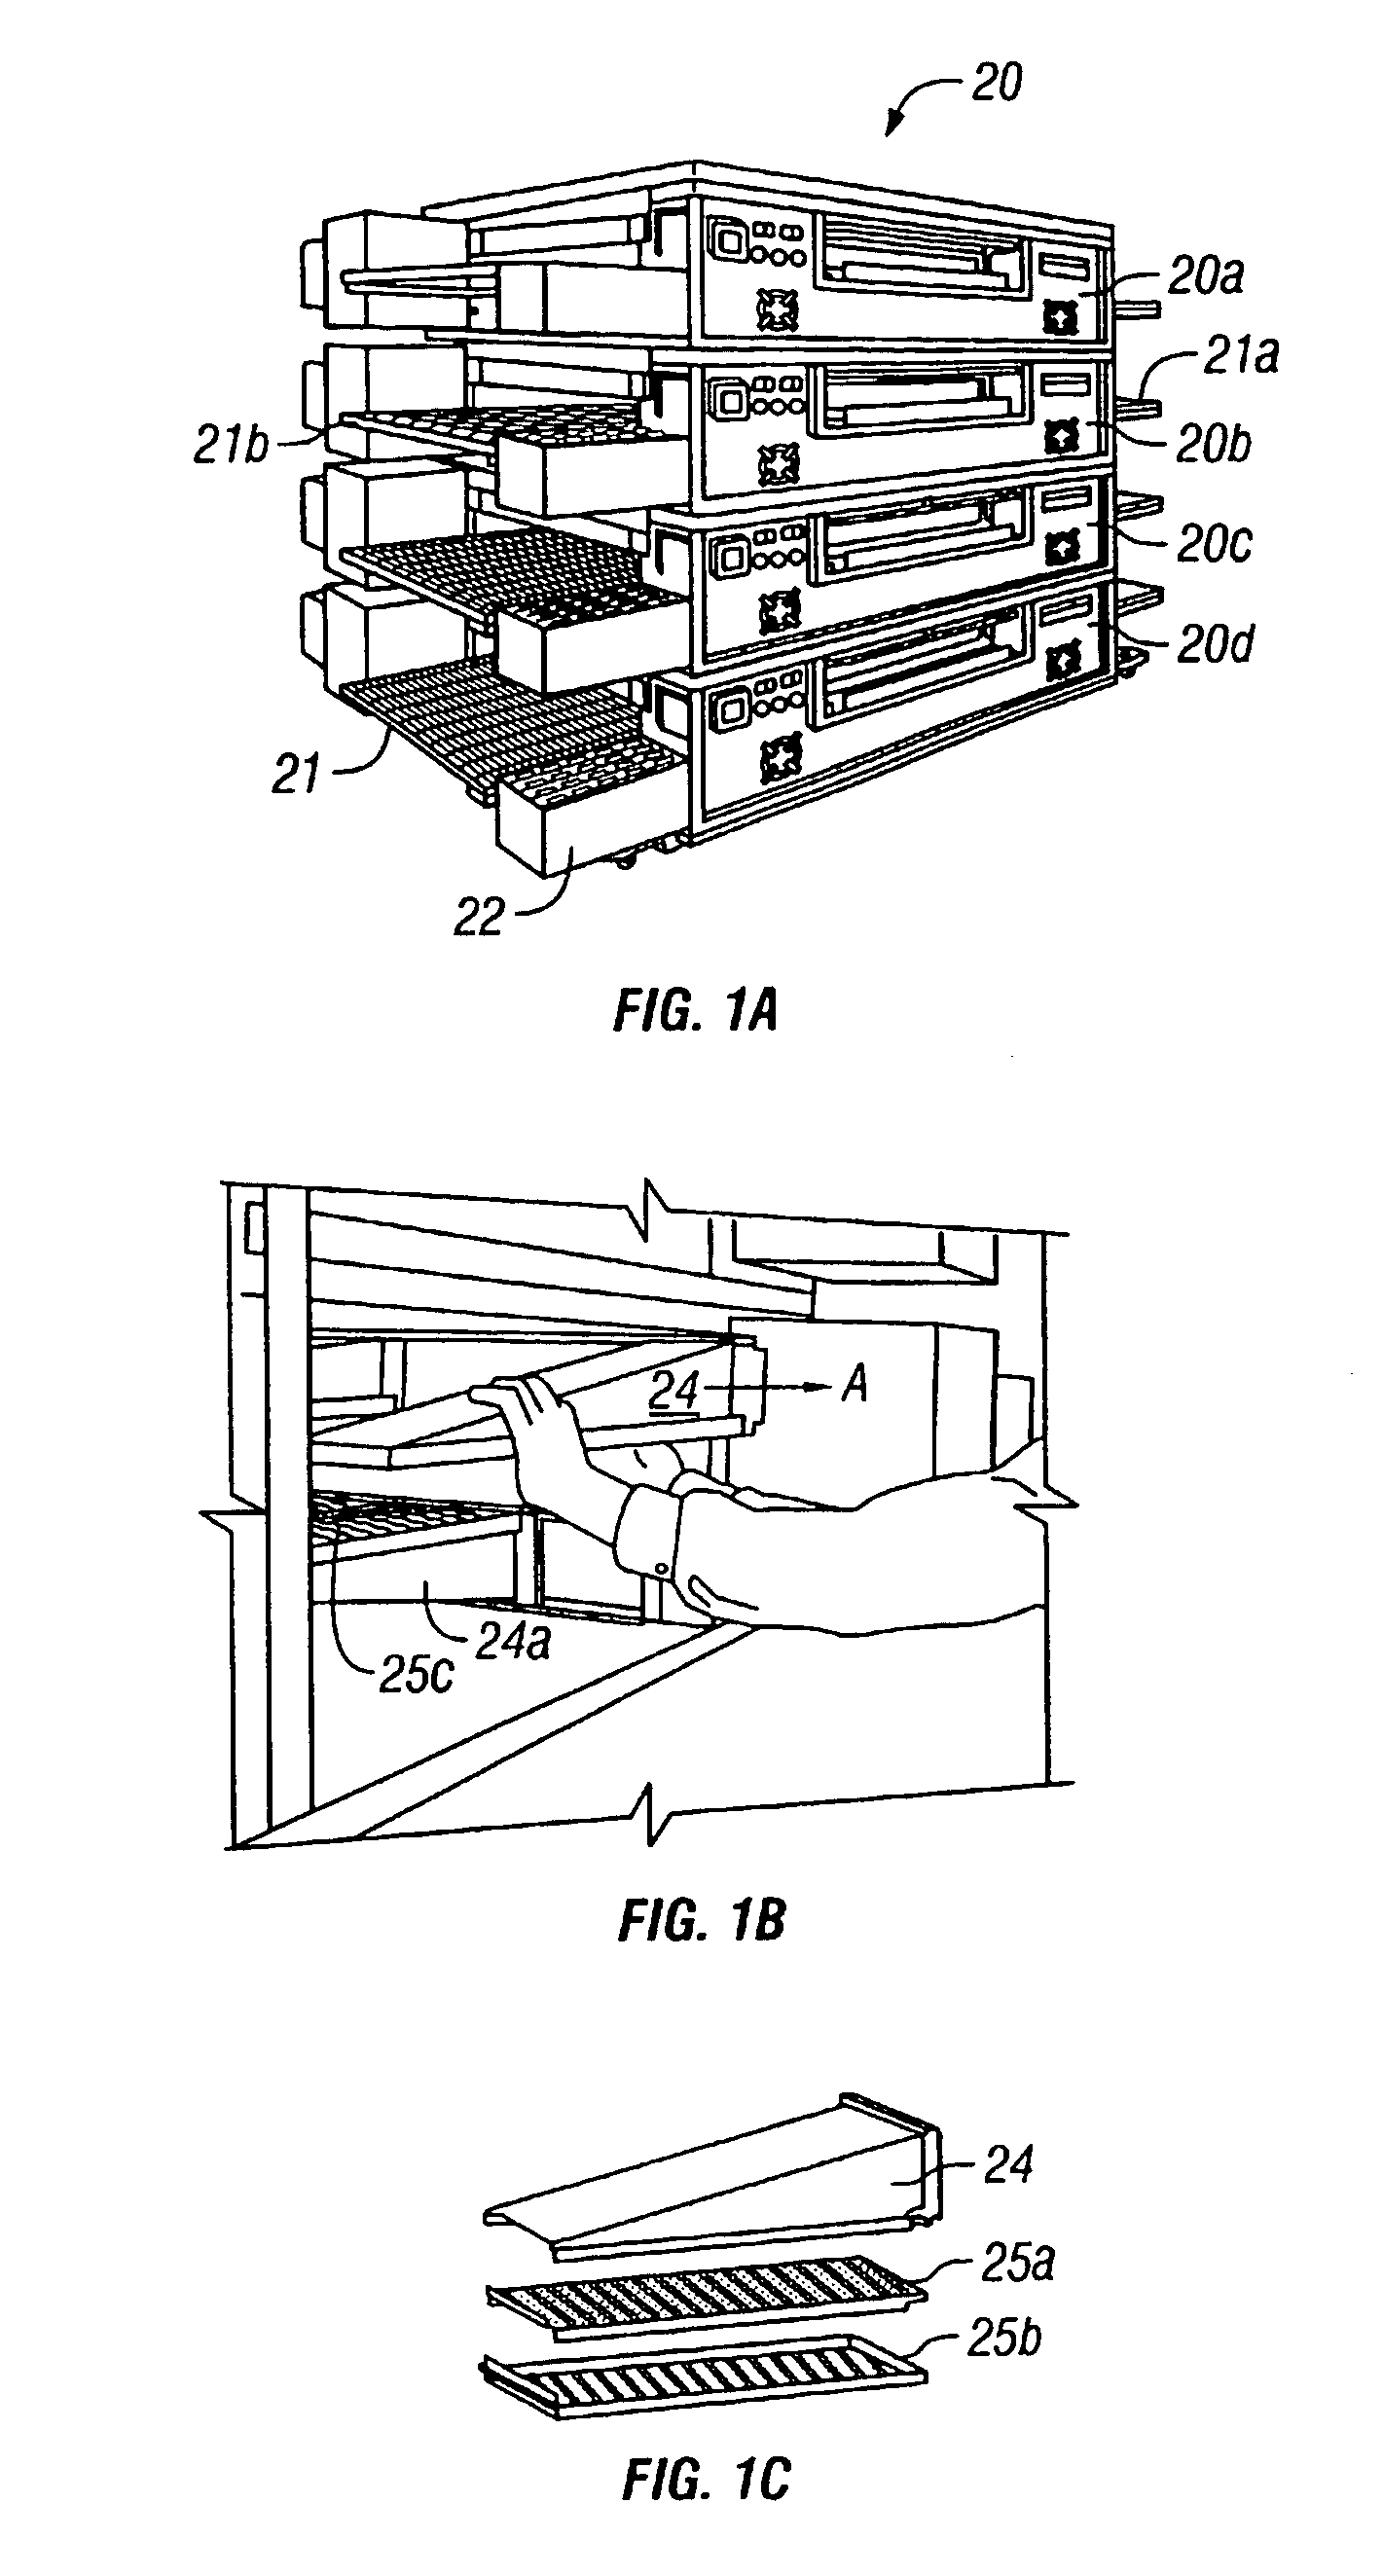 Conveyor oven having an energy management system for a modulated gas flow